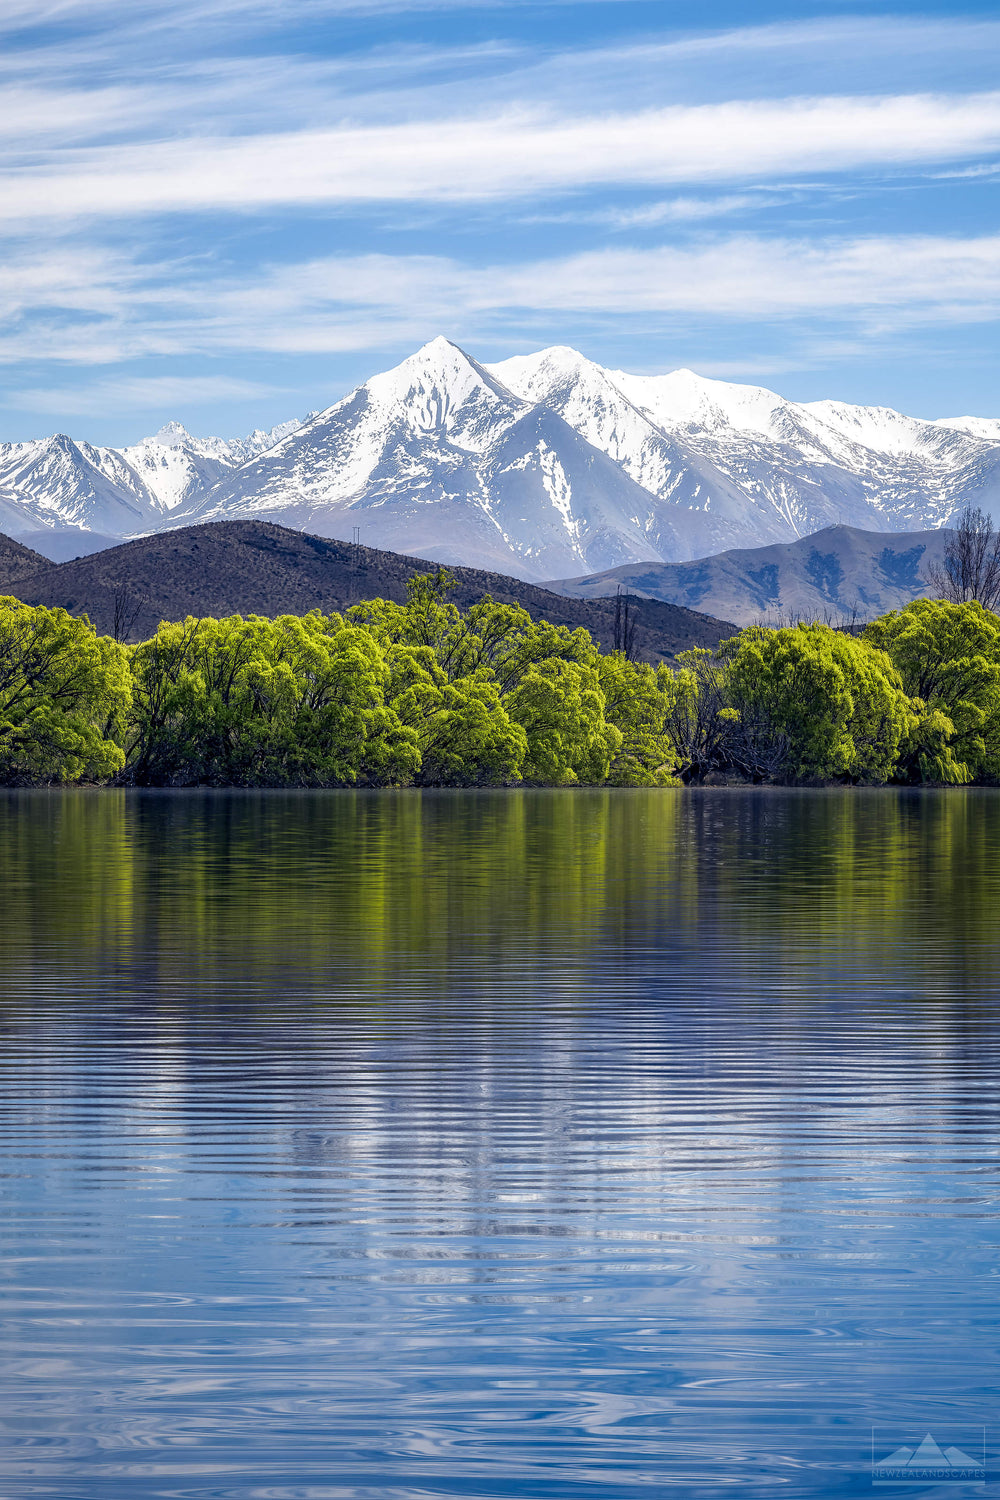 trees reflected in the lake with snow capped mountains in the background.